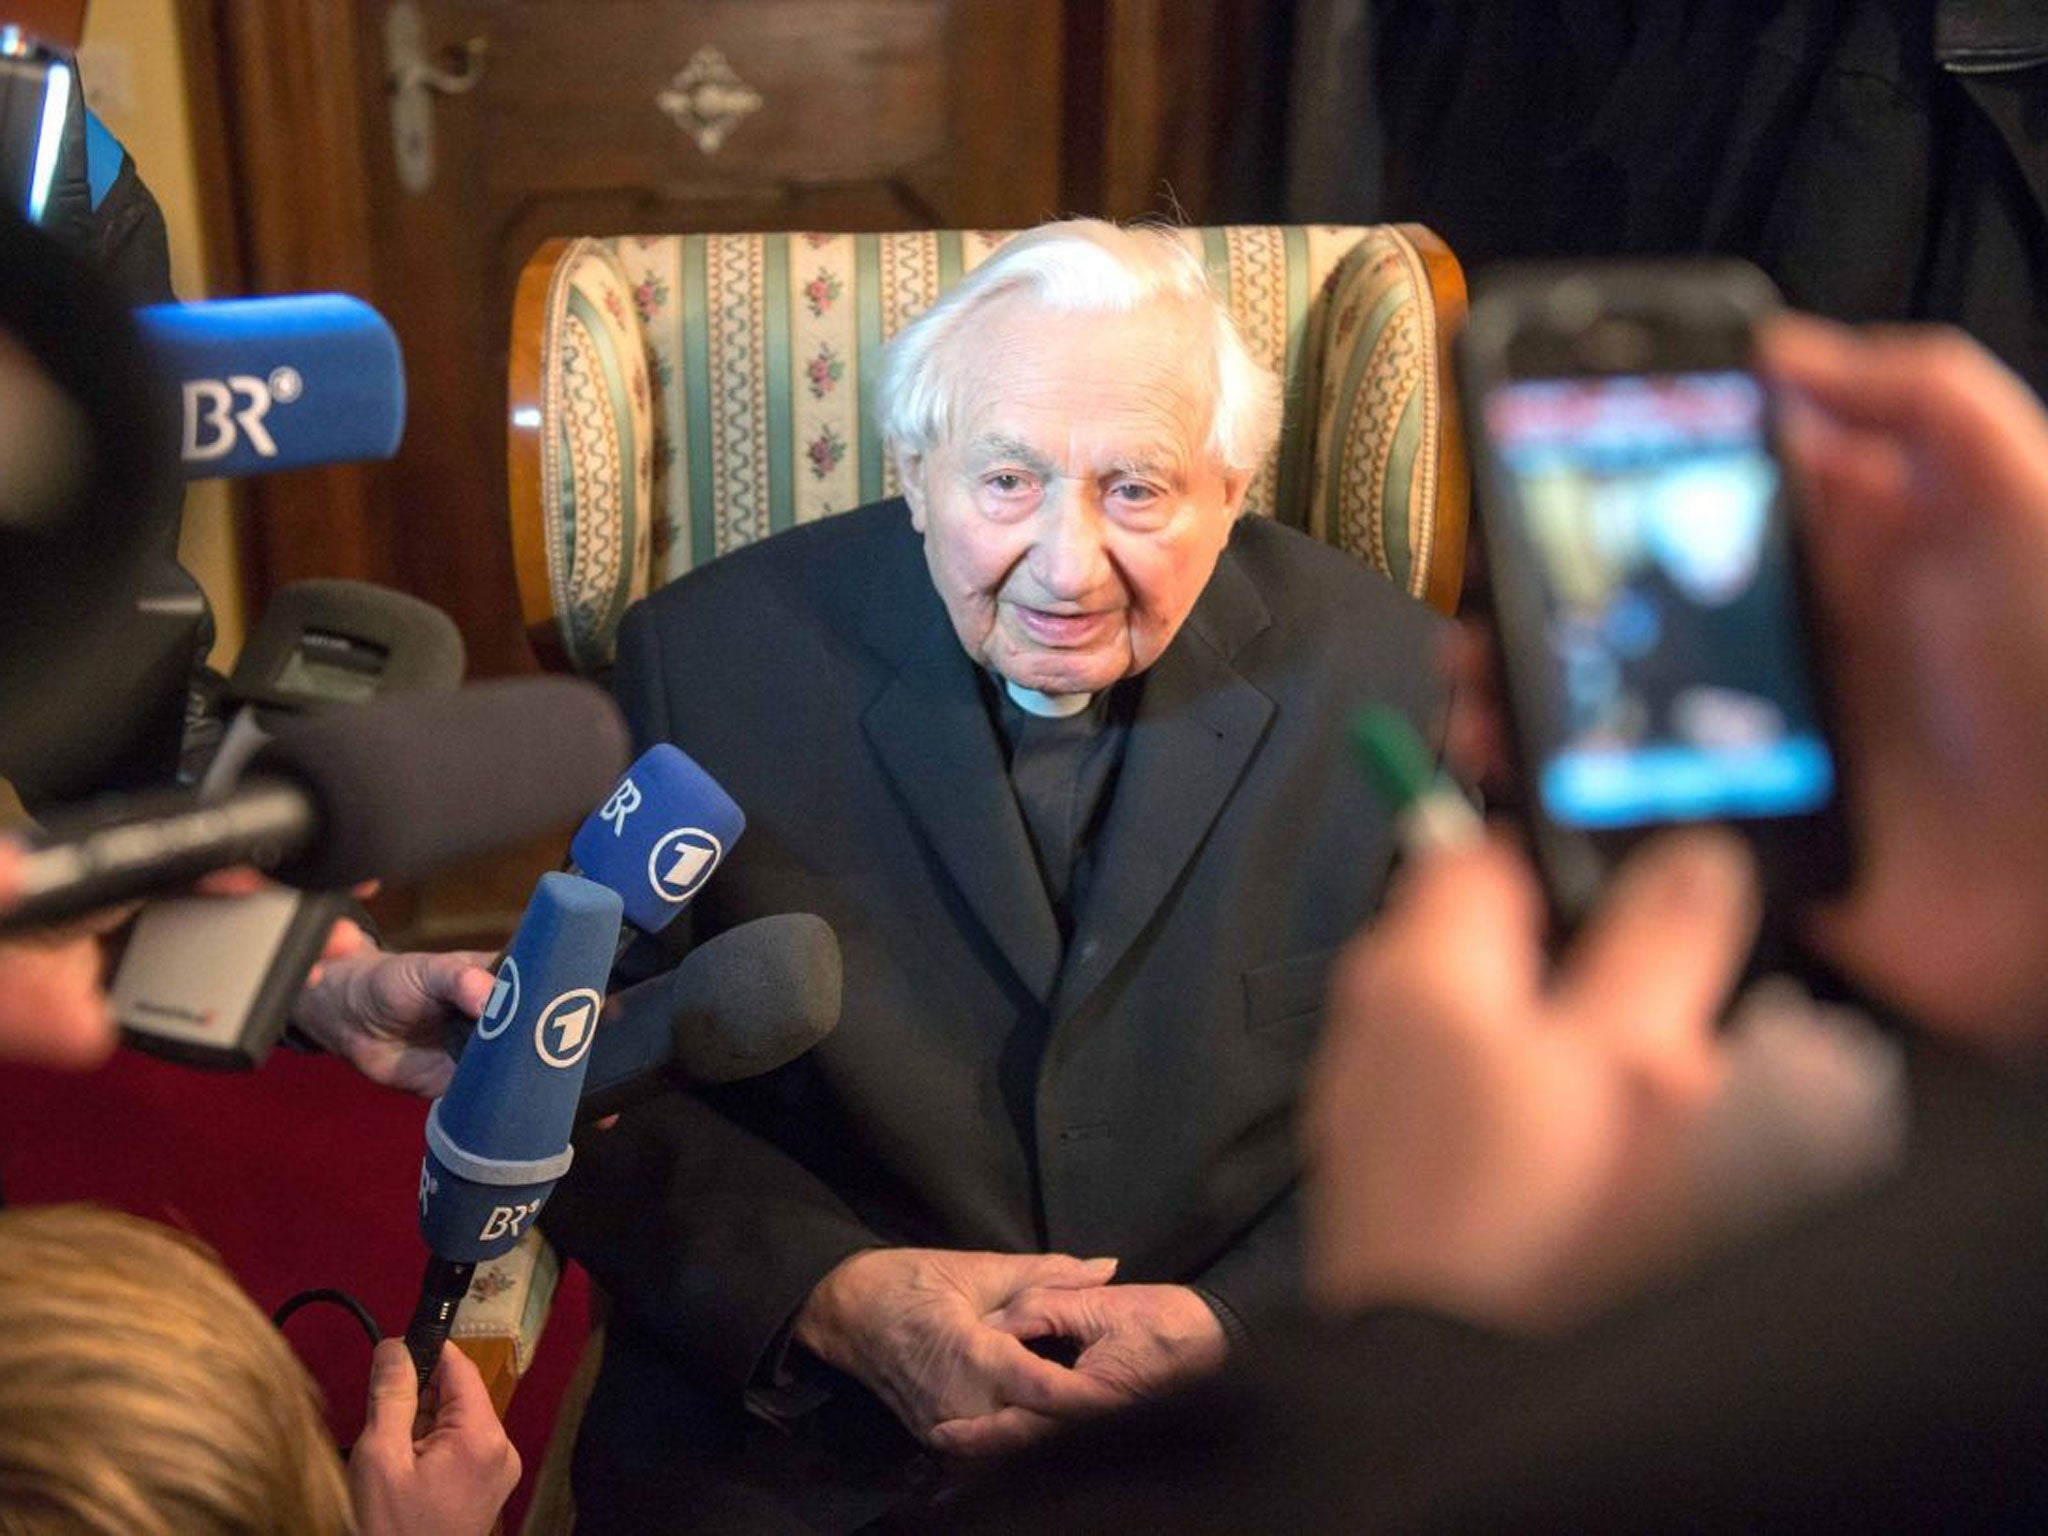 The pope’s brother, 89-year-old Georg Ratzinger, said: “His age is weighing on him... At this age my brother wants more rest”